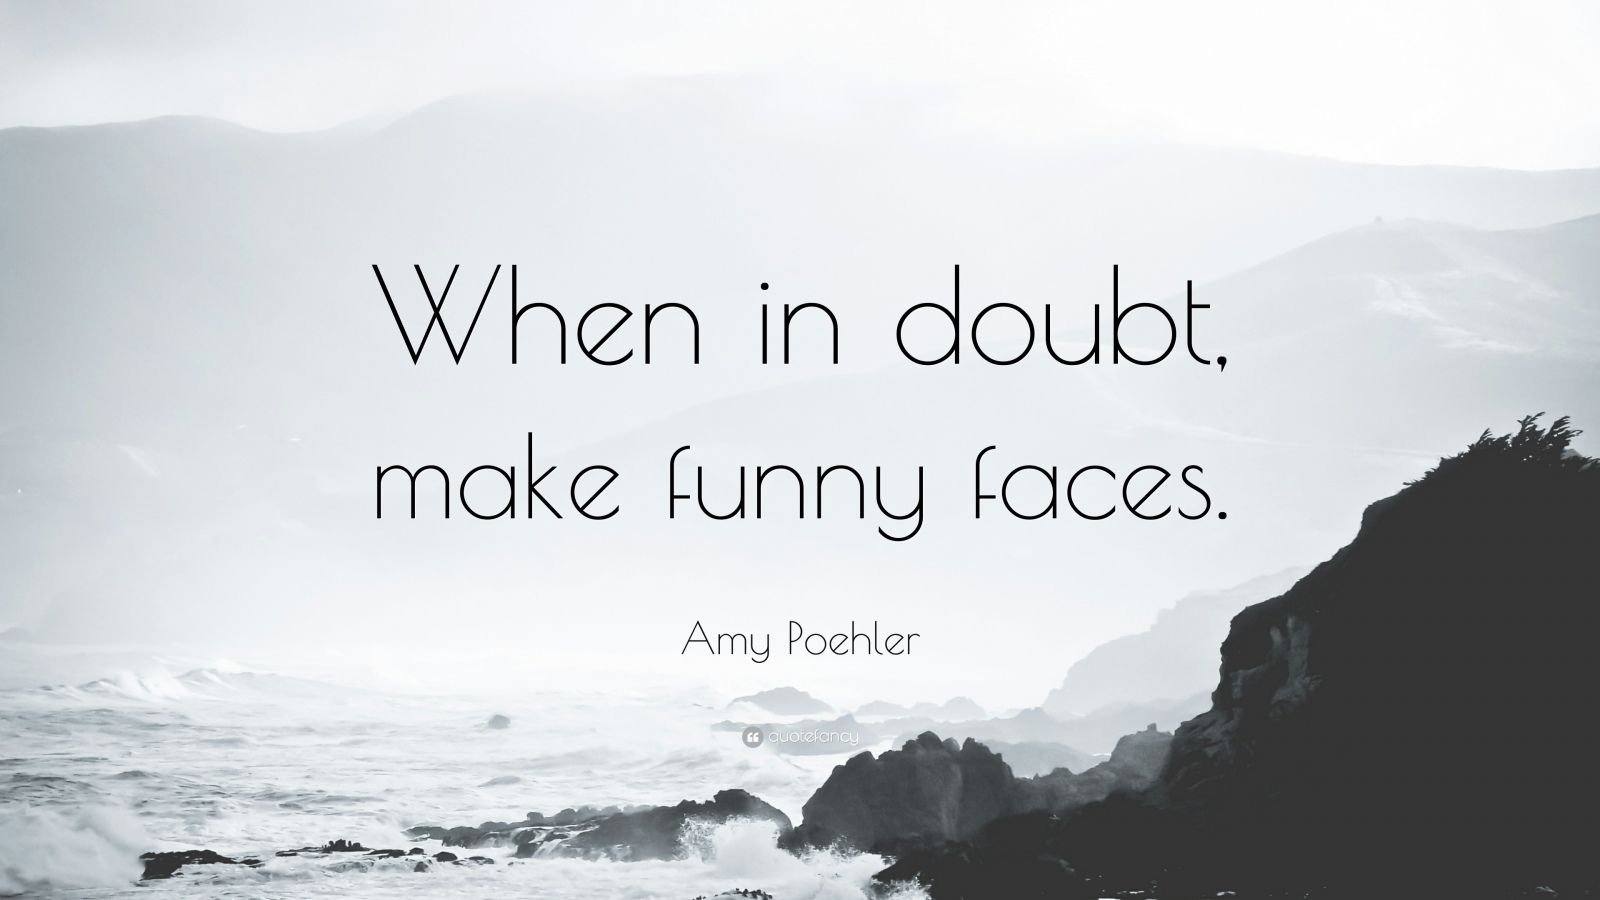 Amy Poehler Quote “When in doubt, make funny faces.”